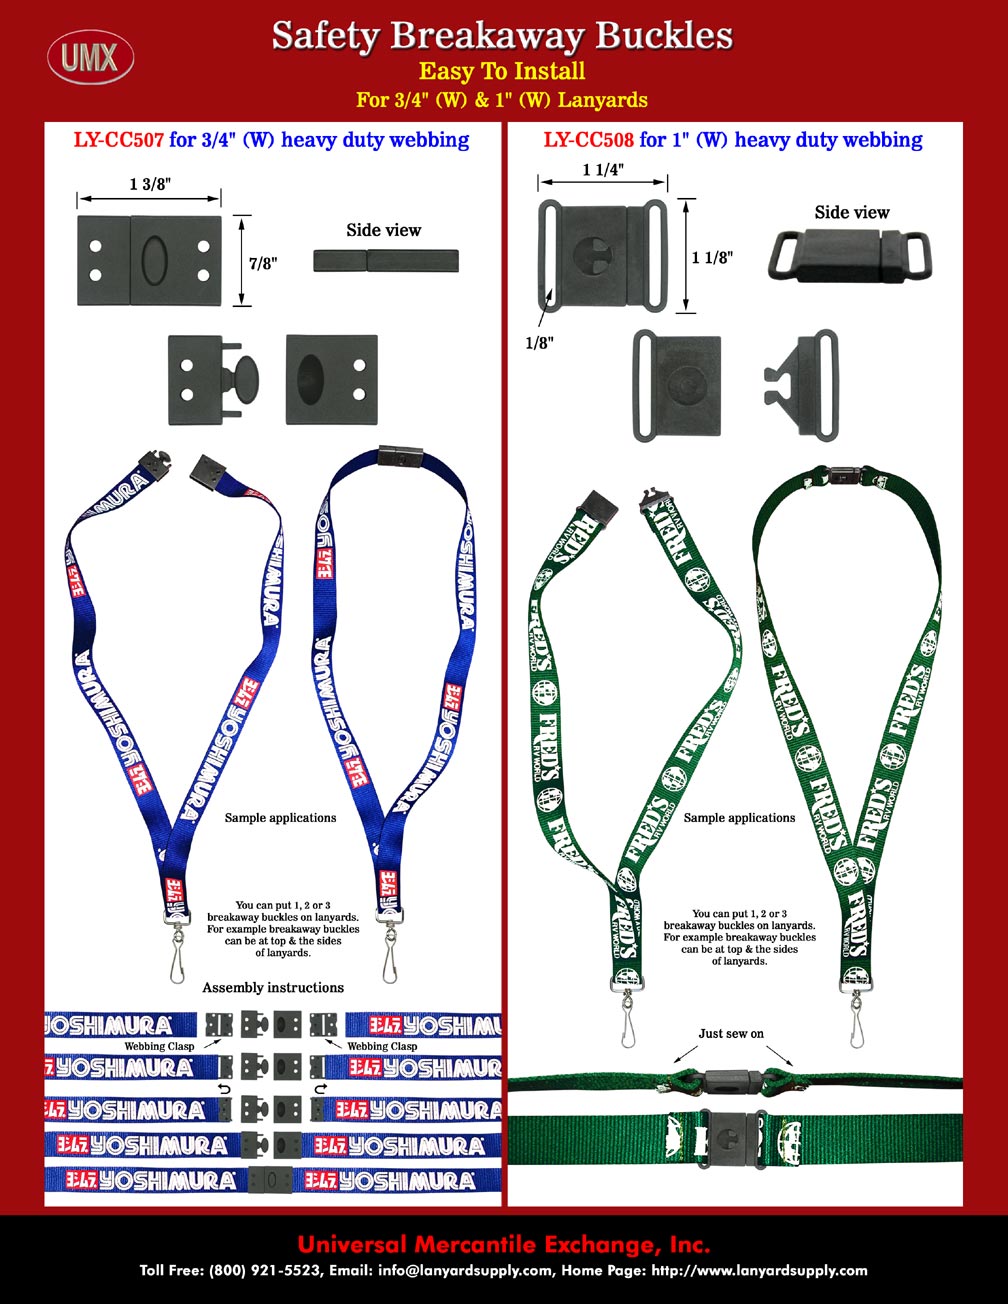 Safety ID Lanyards Hardware Accessory: Industrial Safety Breakaway Plastic Buckles or Plastic Connectors with How to Make Lanyard Instructions